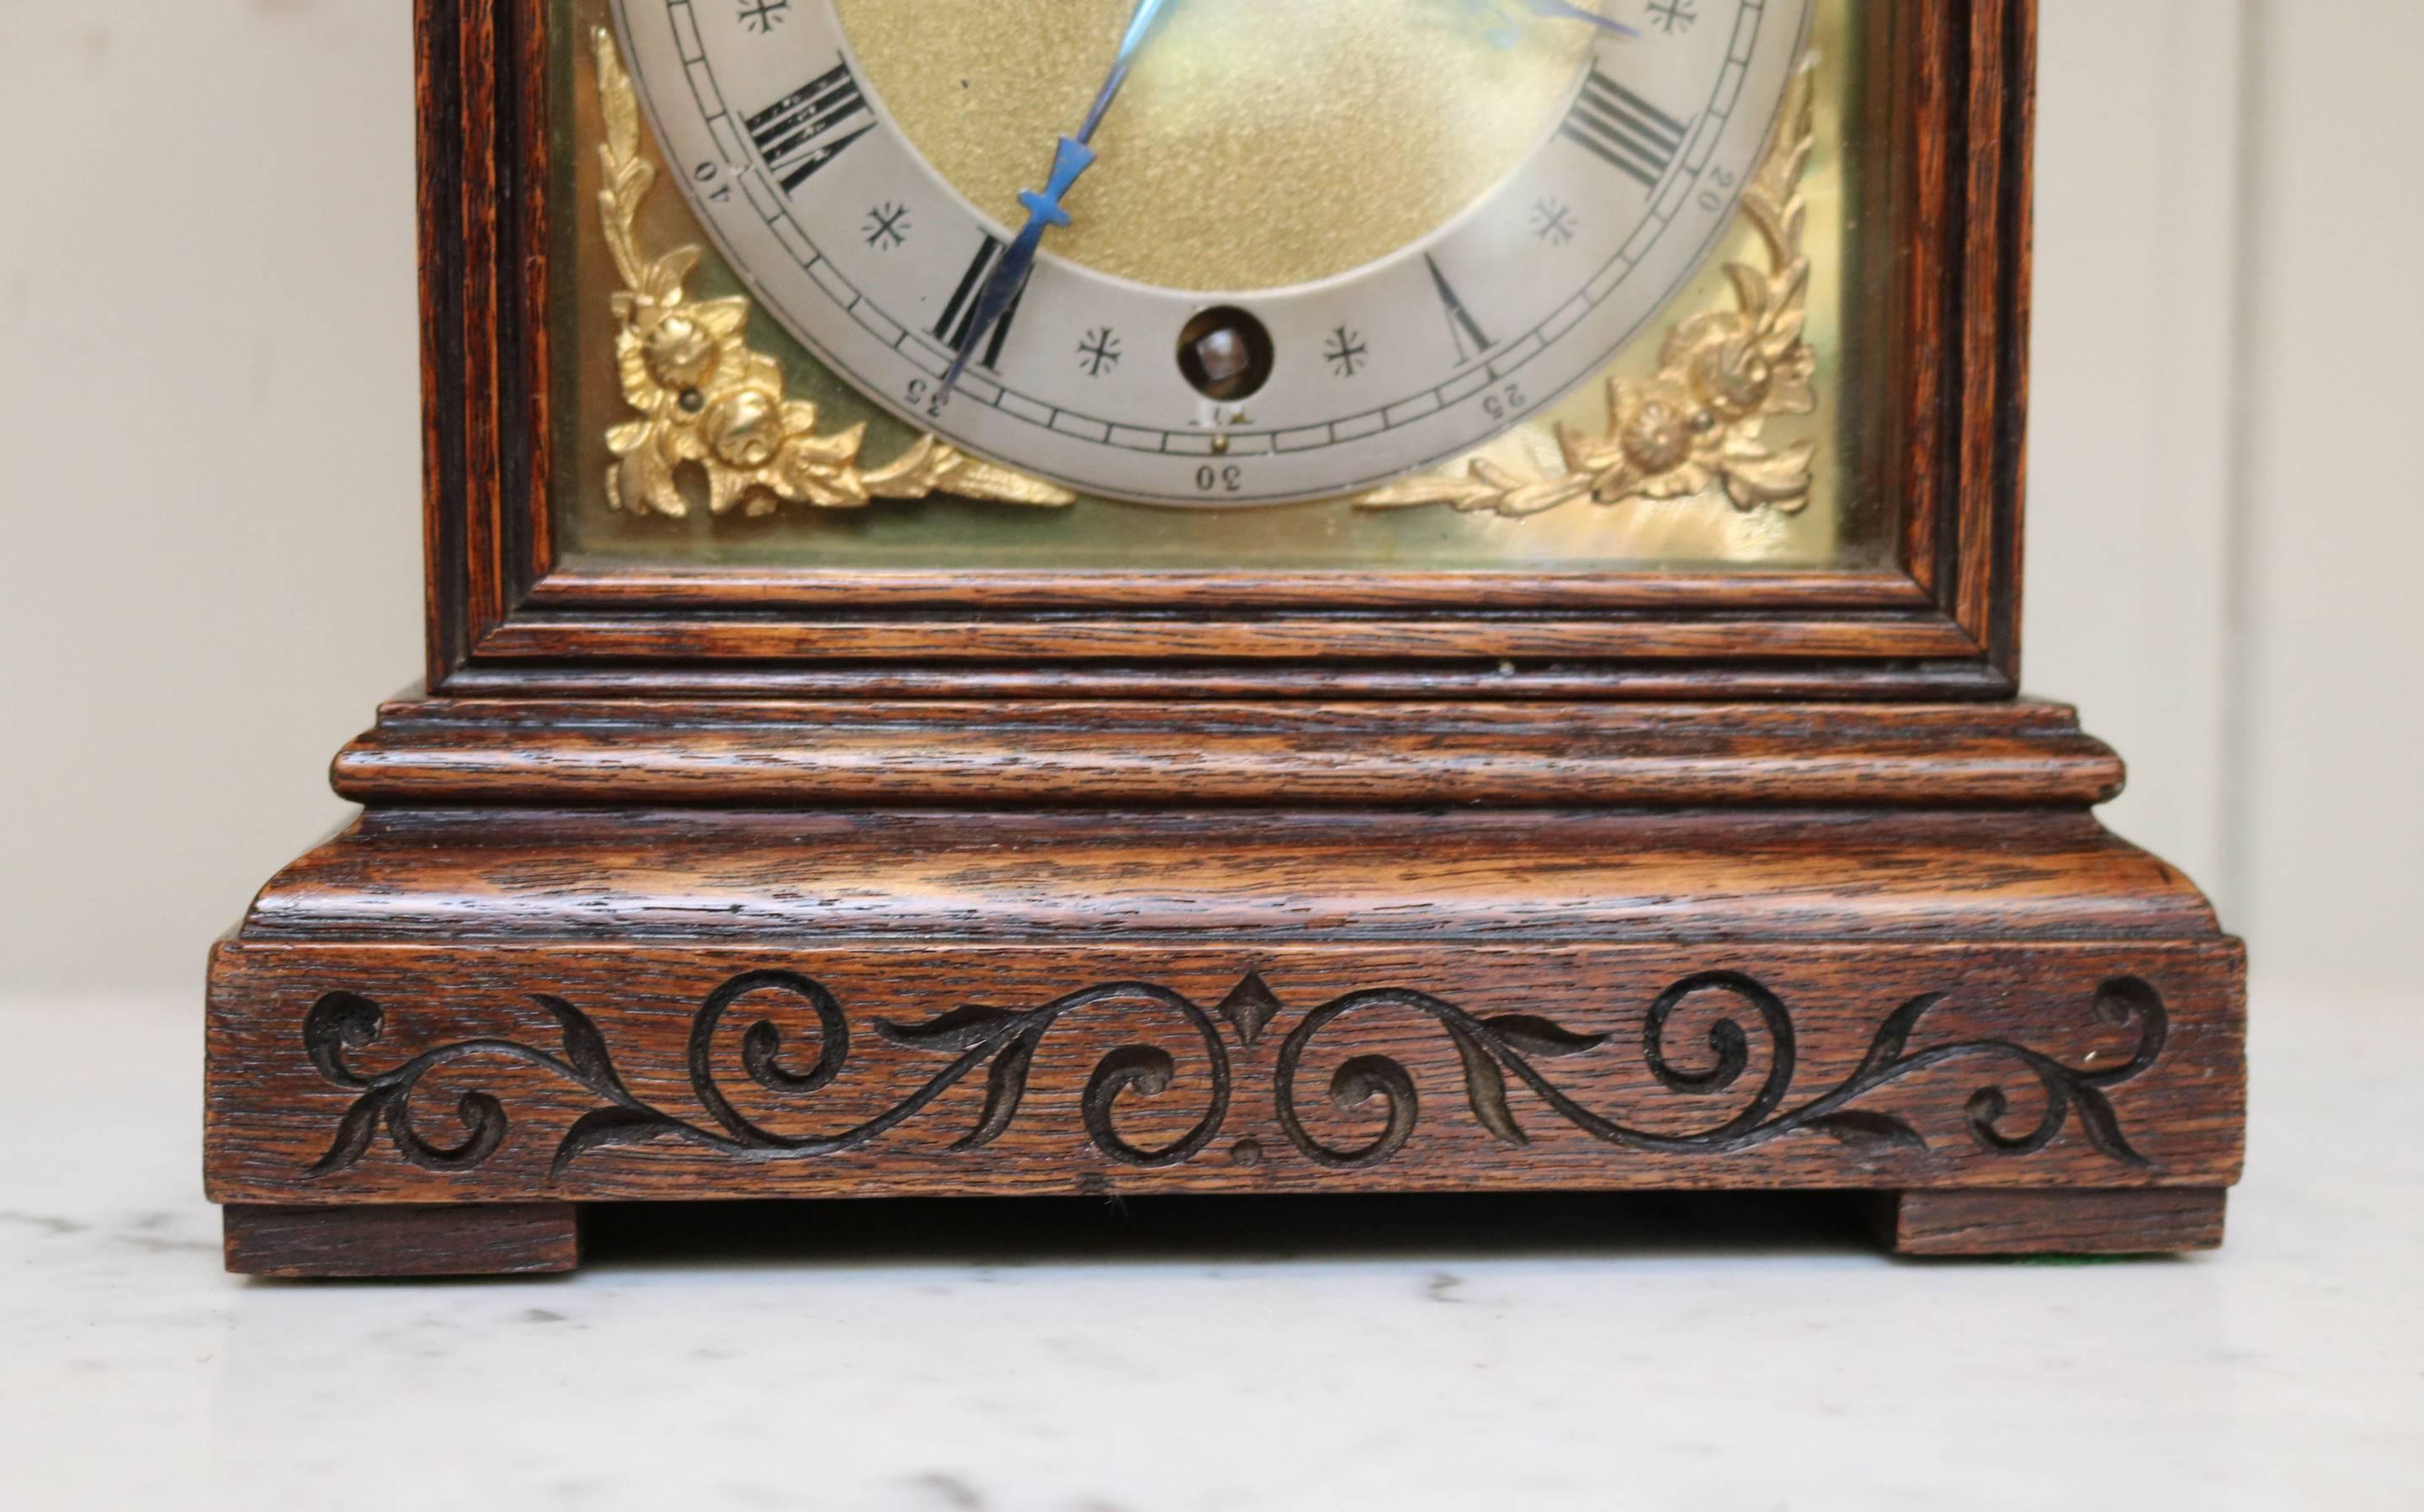 A small, solid oak case mantel clock dating to the early 20th century. It has an arch top with scroll engraving and a square dial. The brass dial has a silvered chapter ring with a matted centre and cherub spandrels. The eight day timepiece pendulum